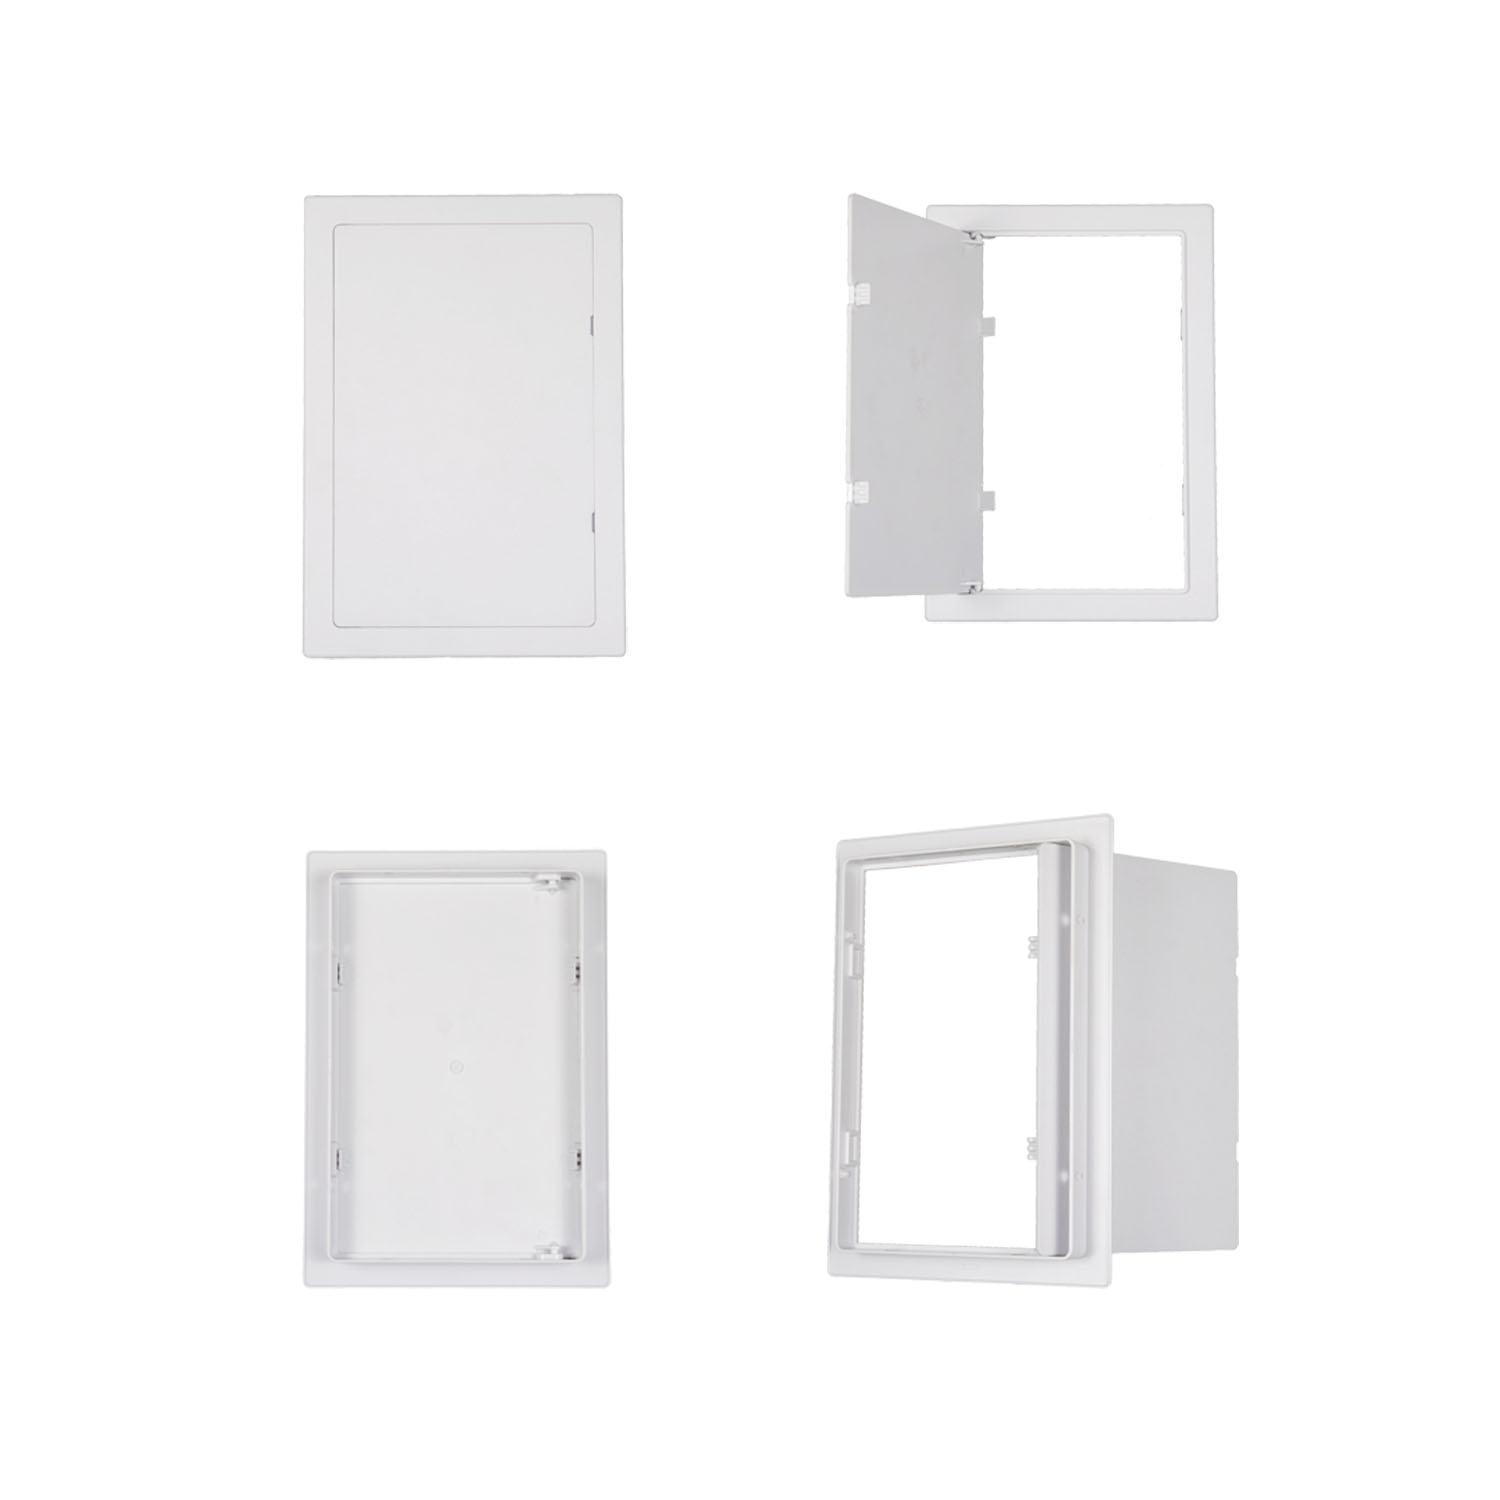 Advantages and disadvantages of access panel between floors.